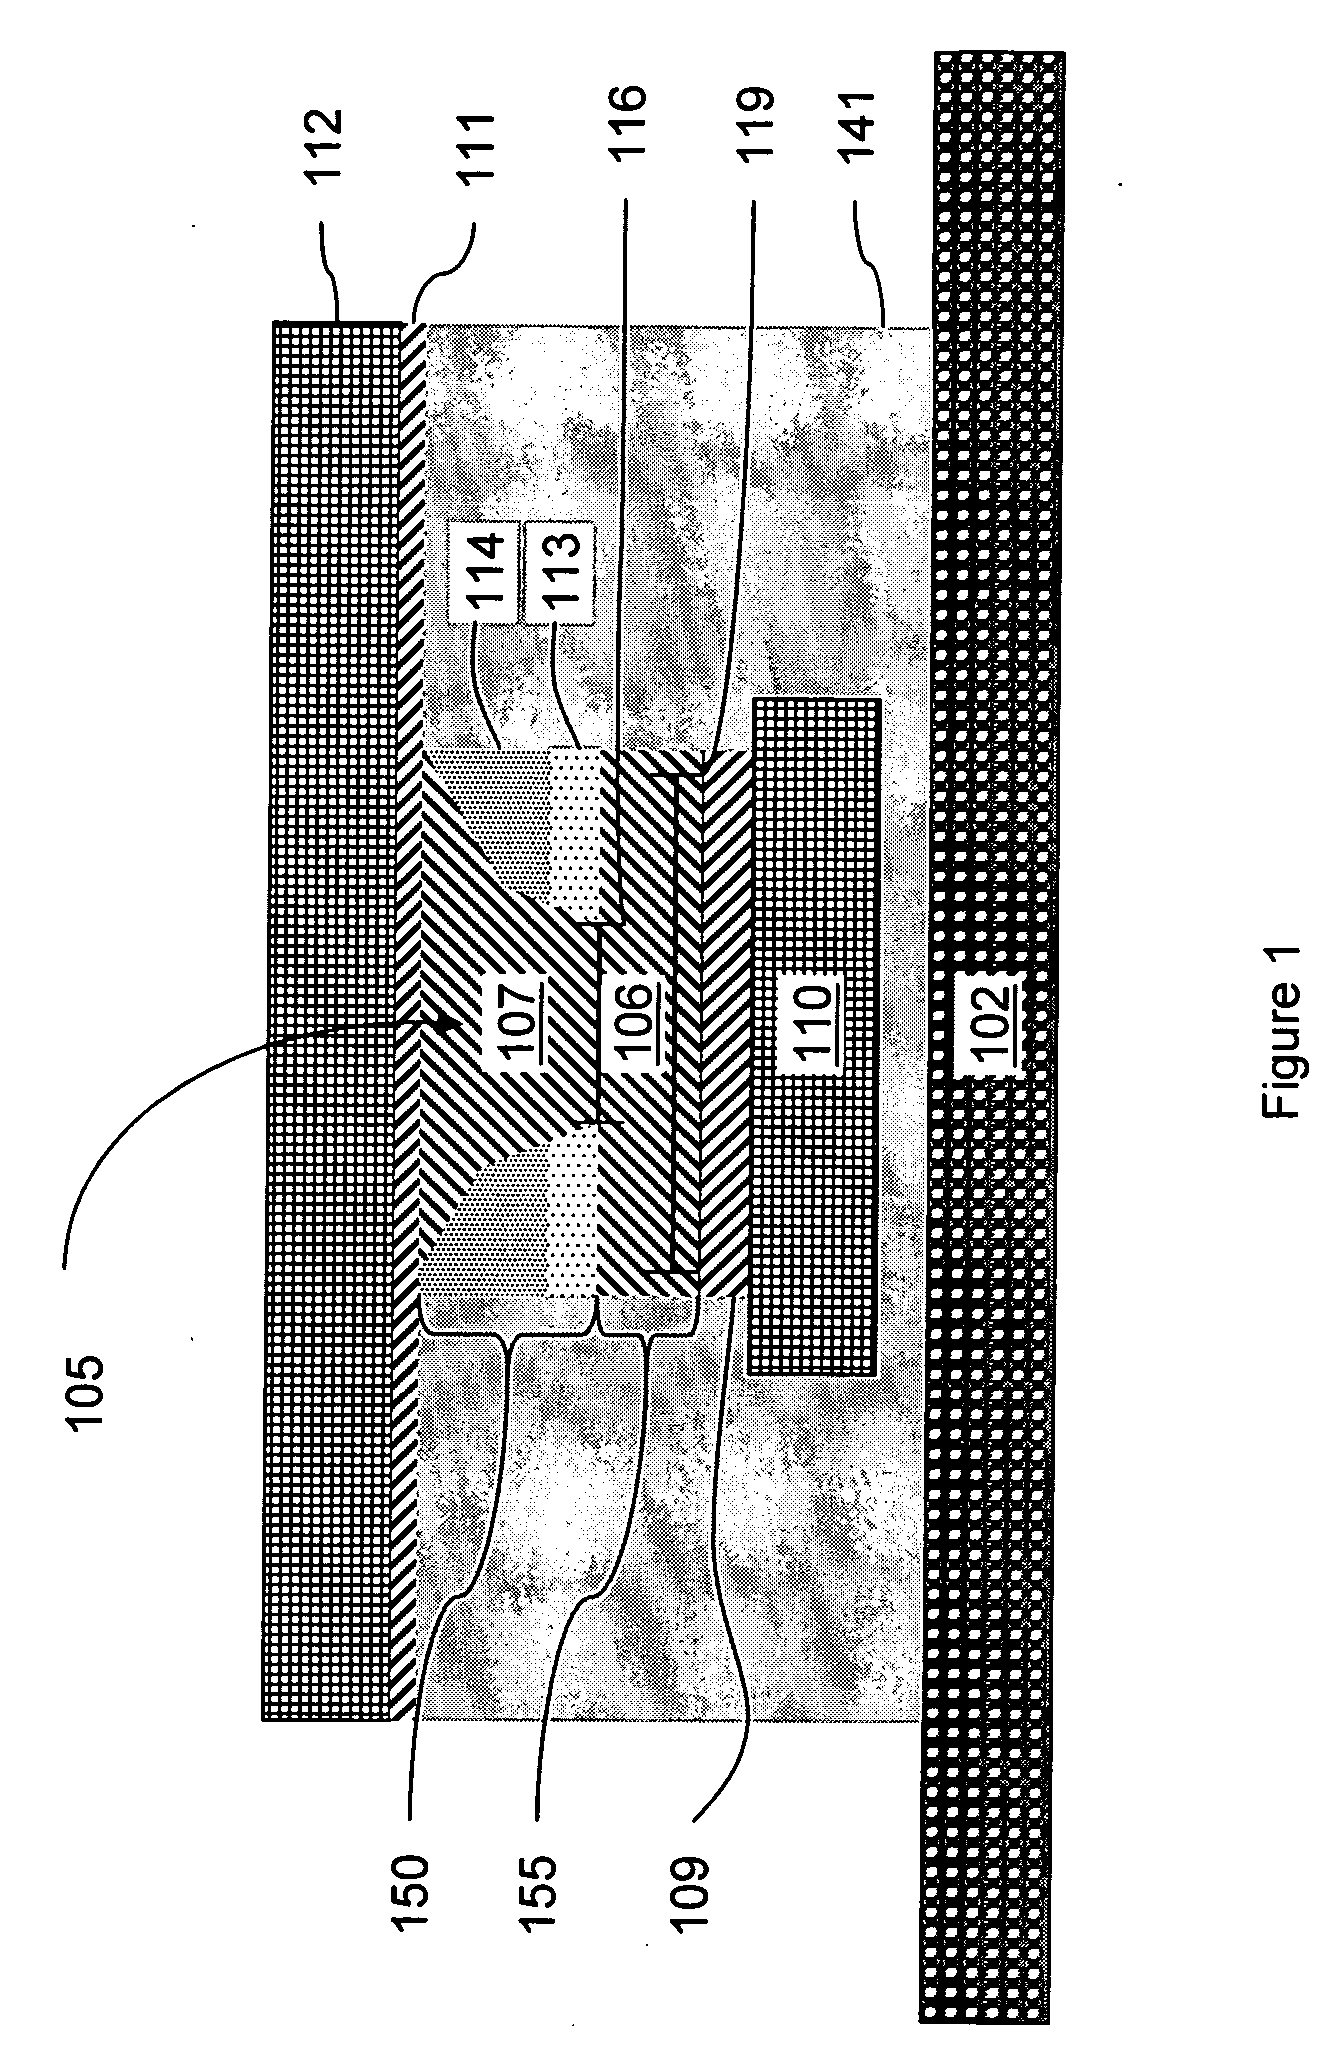 Structure for confining the switching current in phase memory (PCM) cells